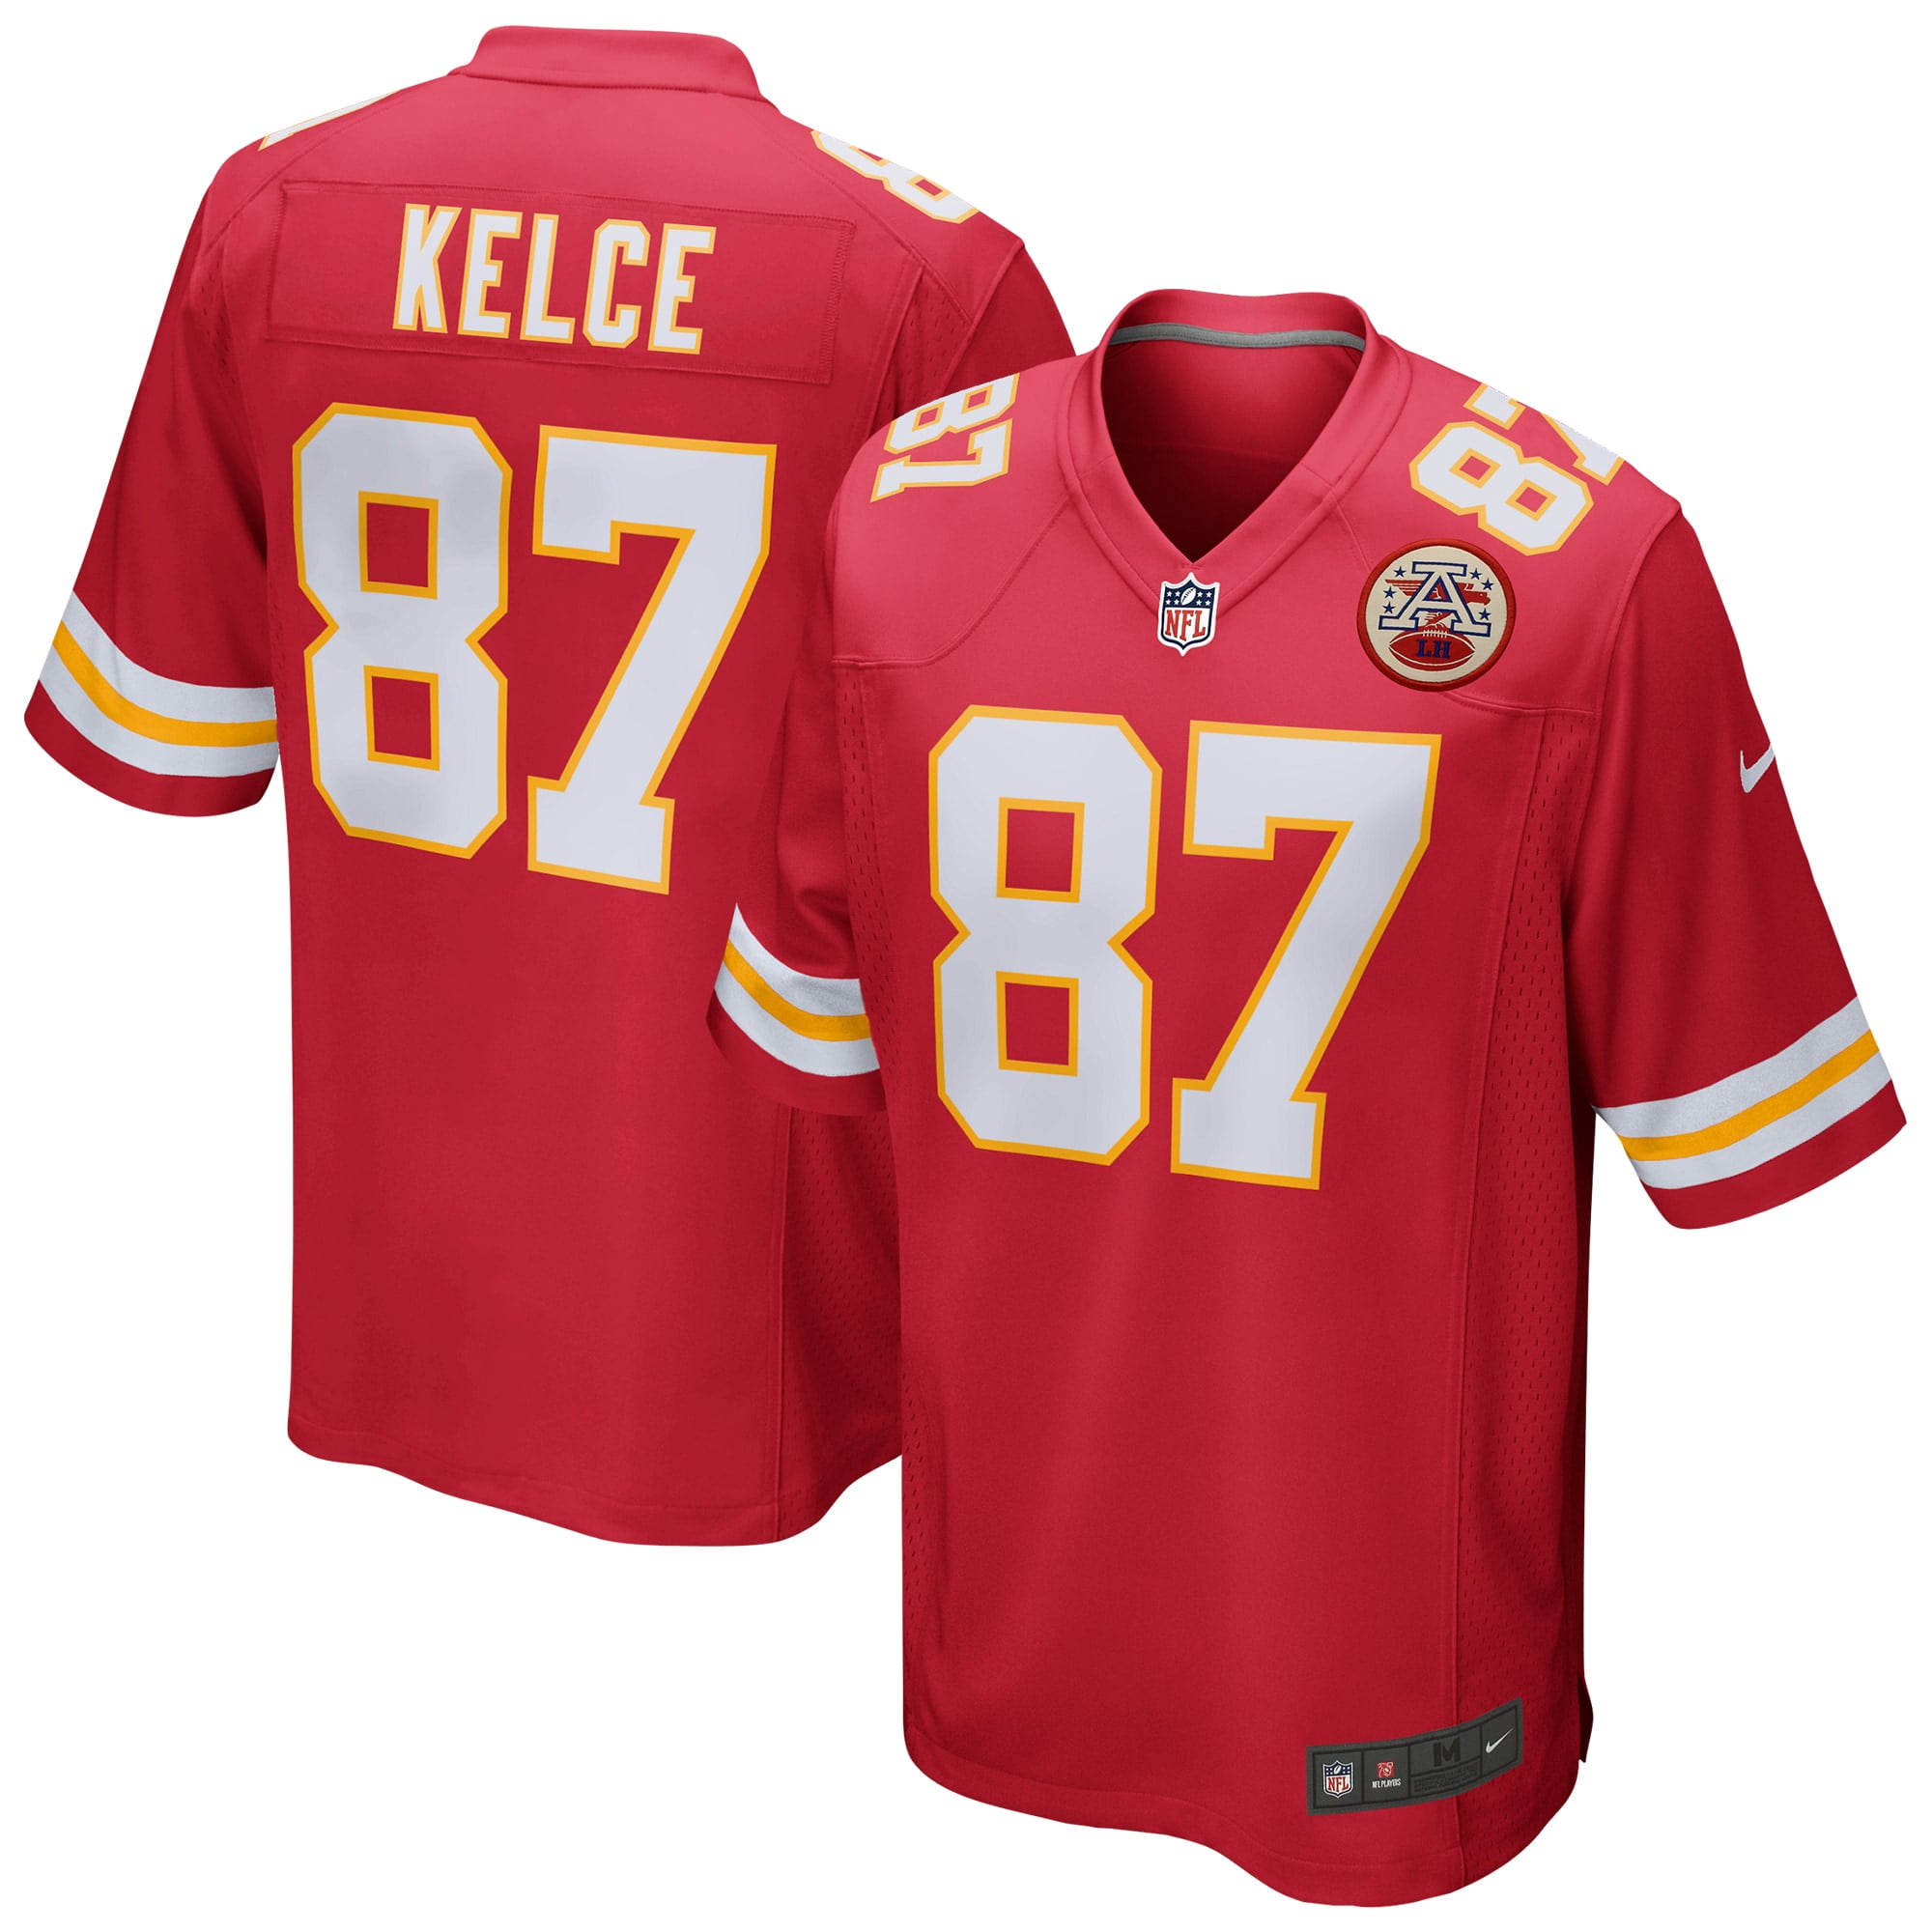 Travis Kelce Wears Cleveland-Inspired Outfit to Chiefs Game